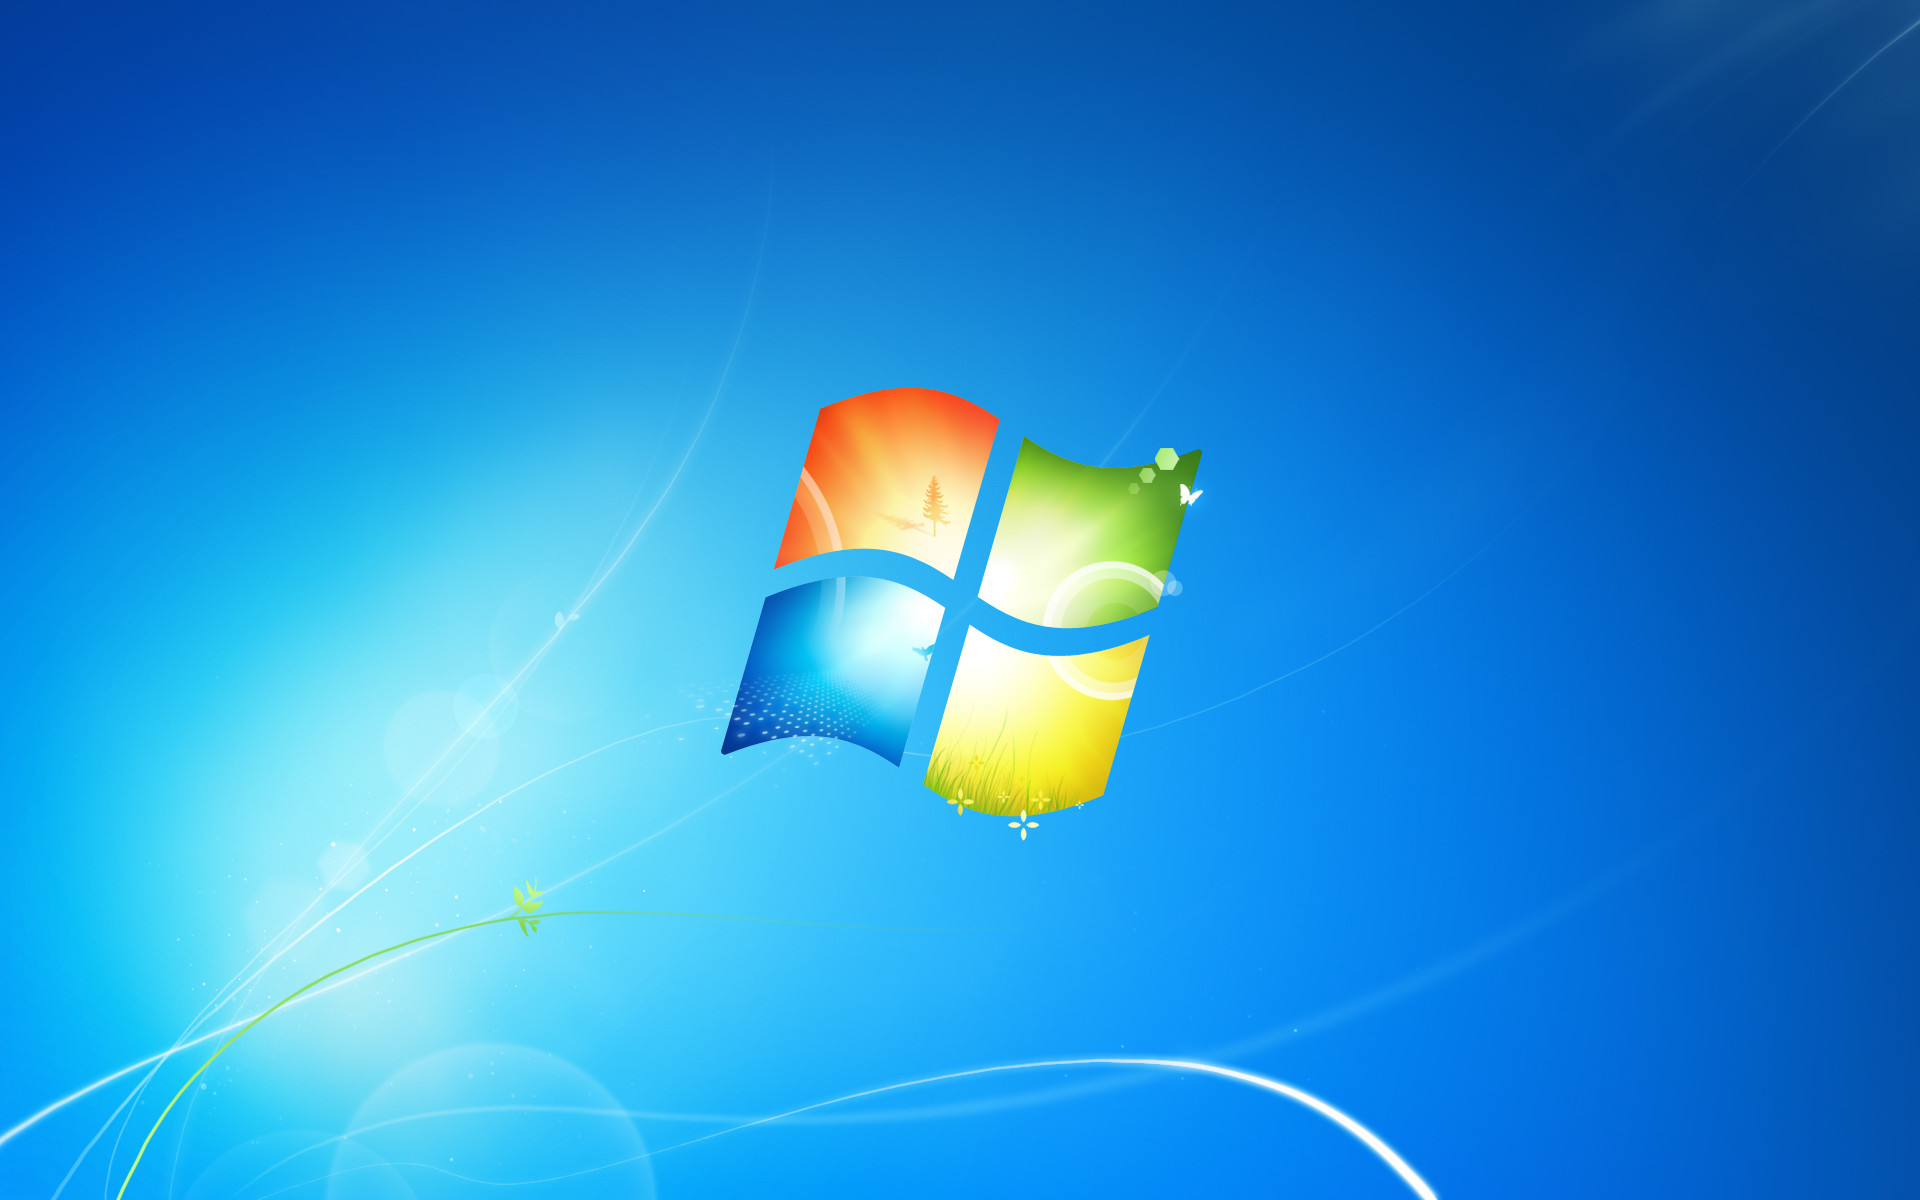 Wallpaper for PC Windows 7 (65+ pictures)